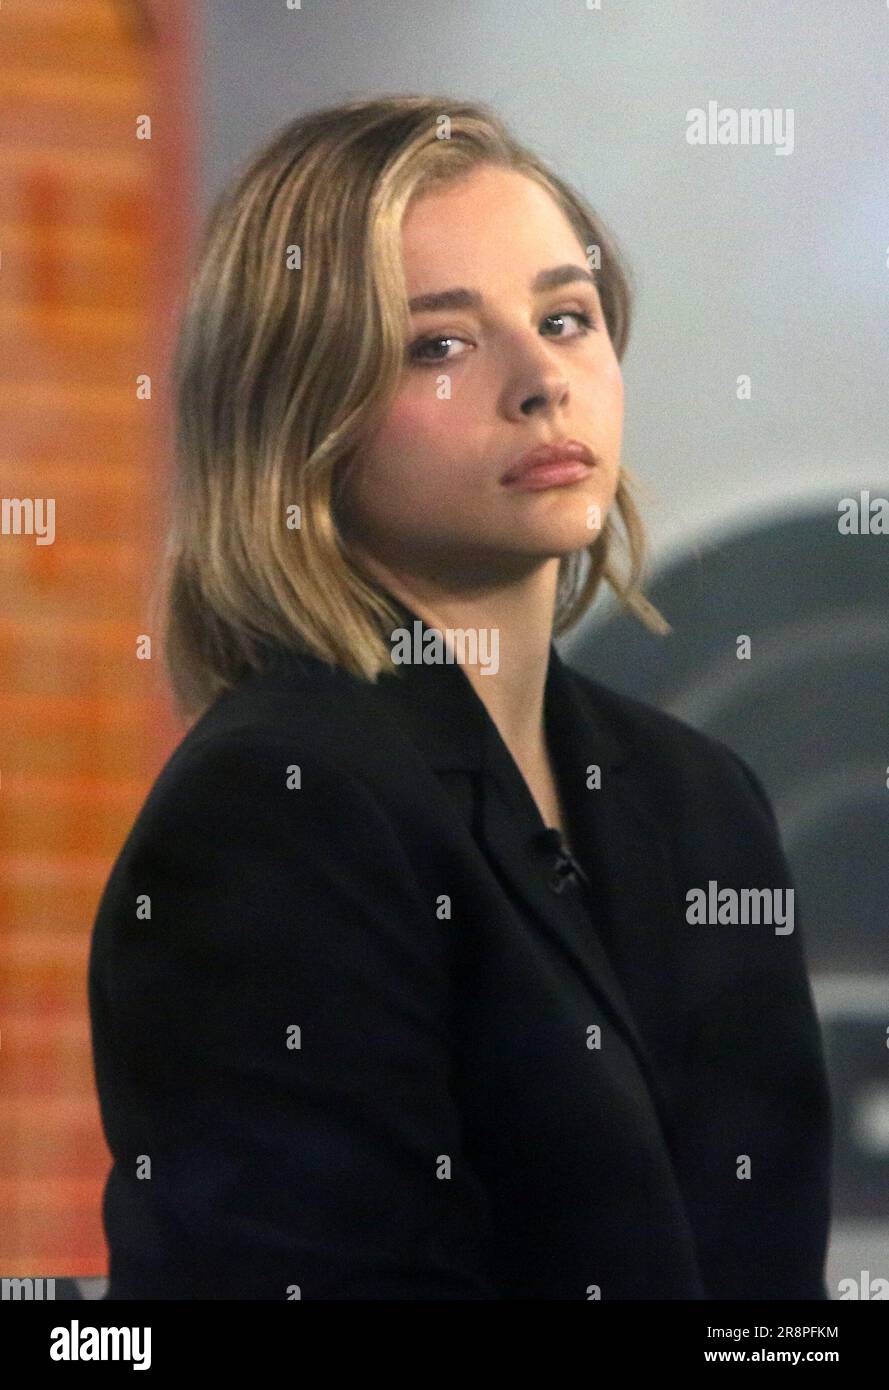 New York, NY, USA. 22nd June, 2023. Chloe Grace Moretz at NBC's Today Show in New York City on June 22, 2023. Credit: Rw/Media Punch/Alamy Live News Stock Photo